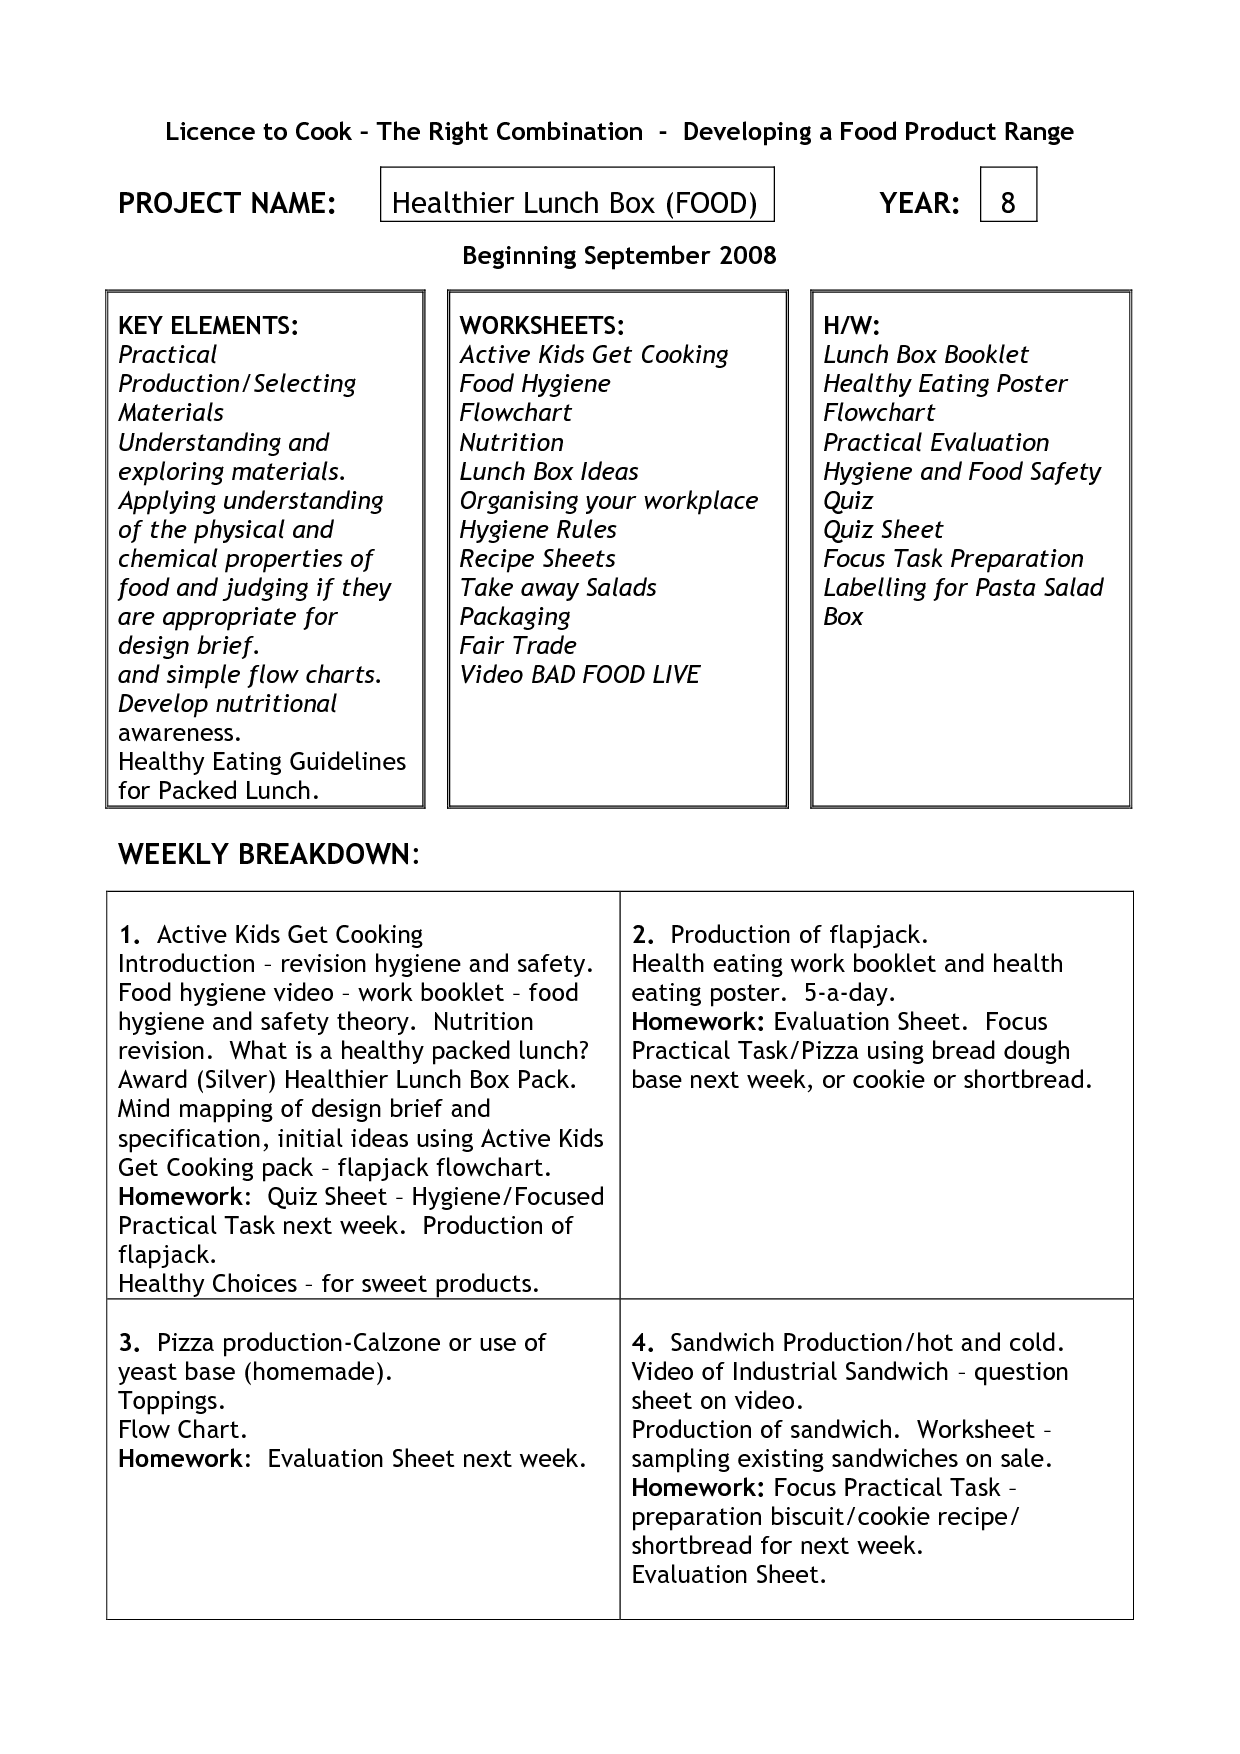 11 Best Images of Healthy Lunchbox Worksheets - Healthy Lunch Box